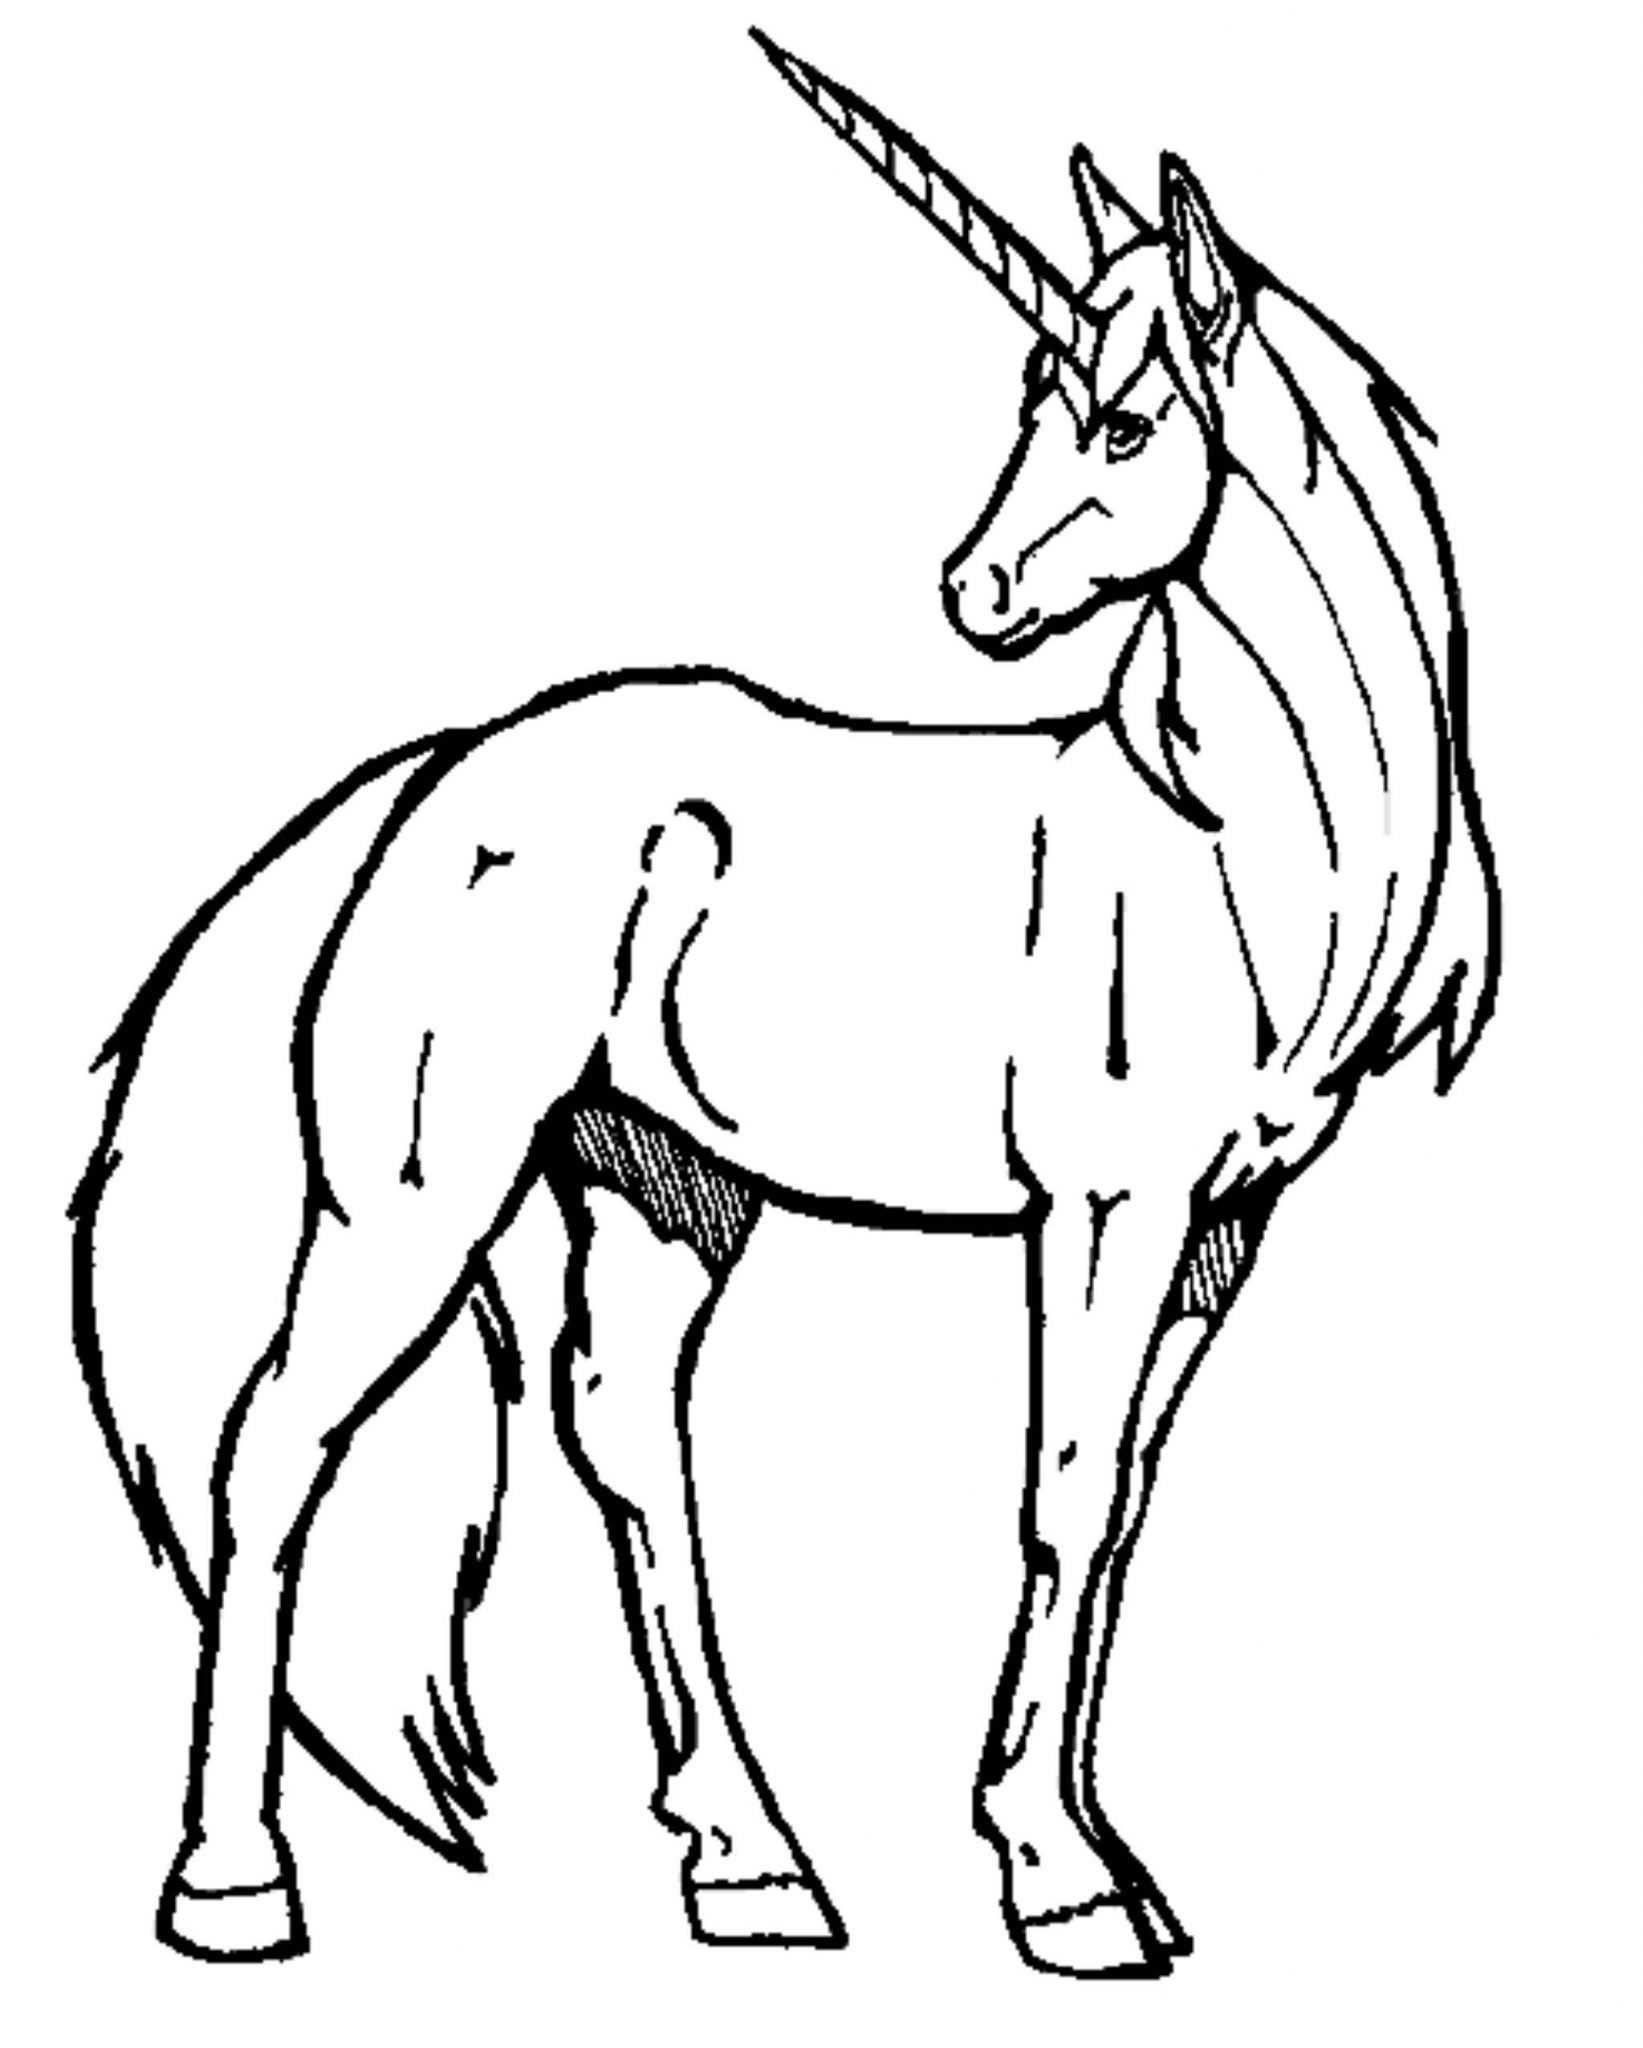 Unicorn Coloring Sheets For Kids
 Print & Download Unicorn Coloring Pages for Children